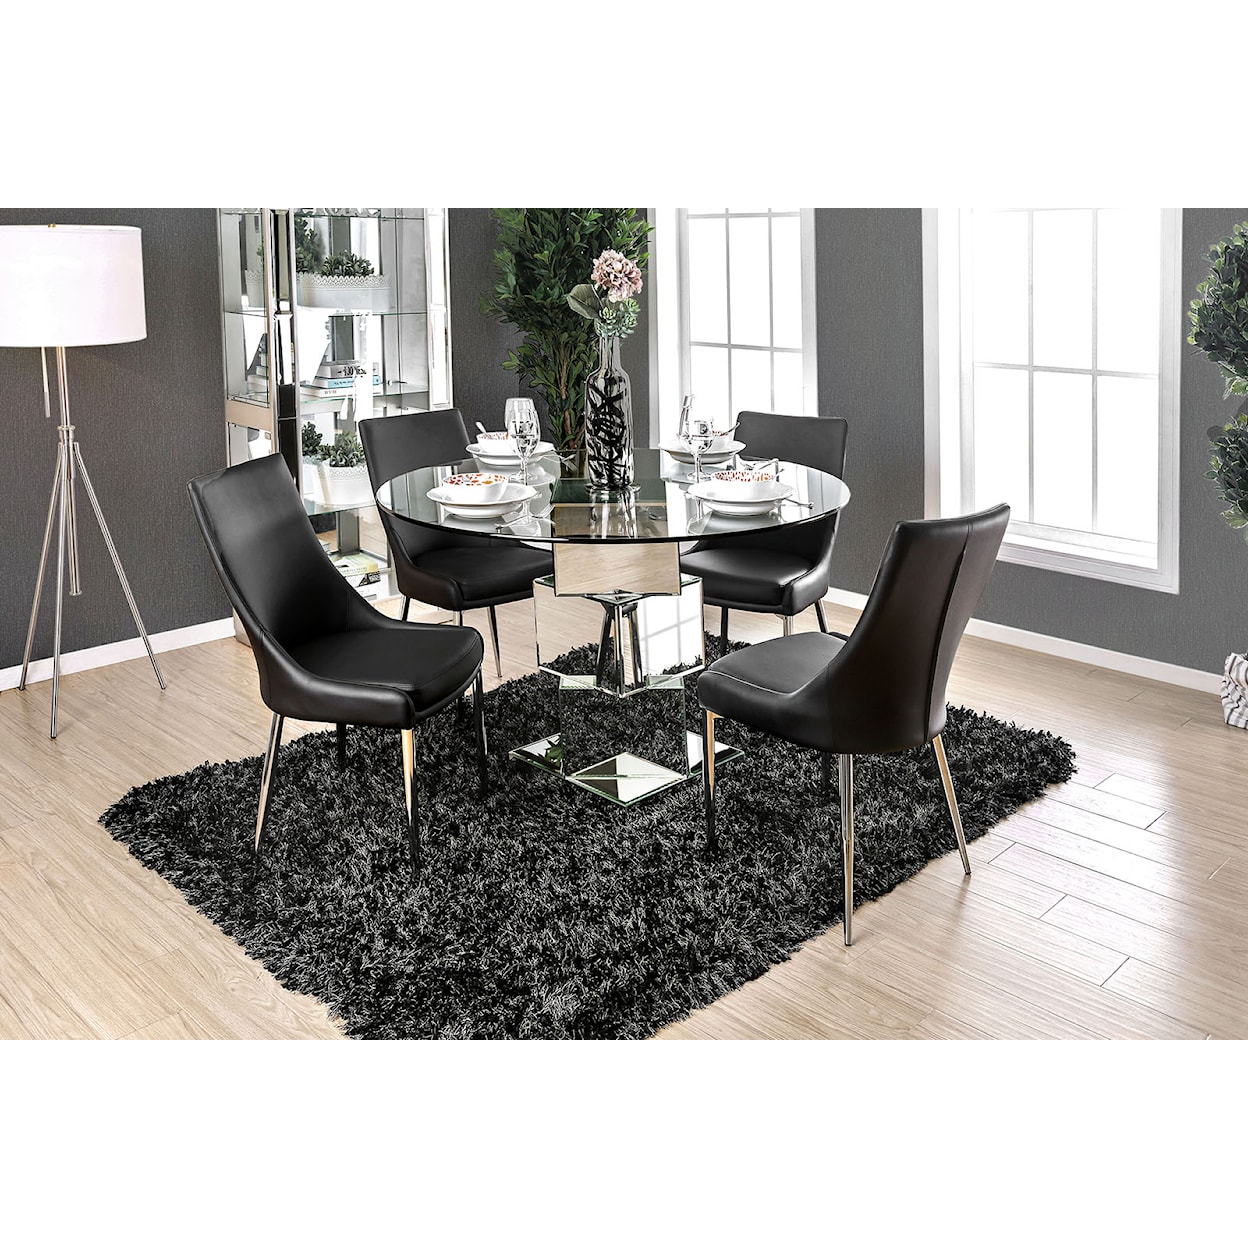 Furniture of America Izzy 5-Piece Dining Set